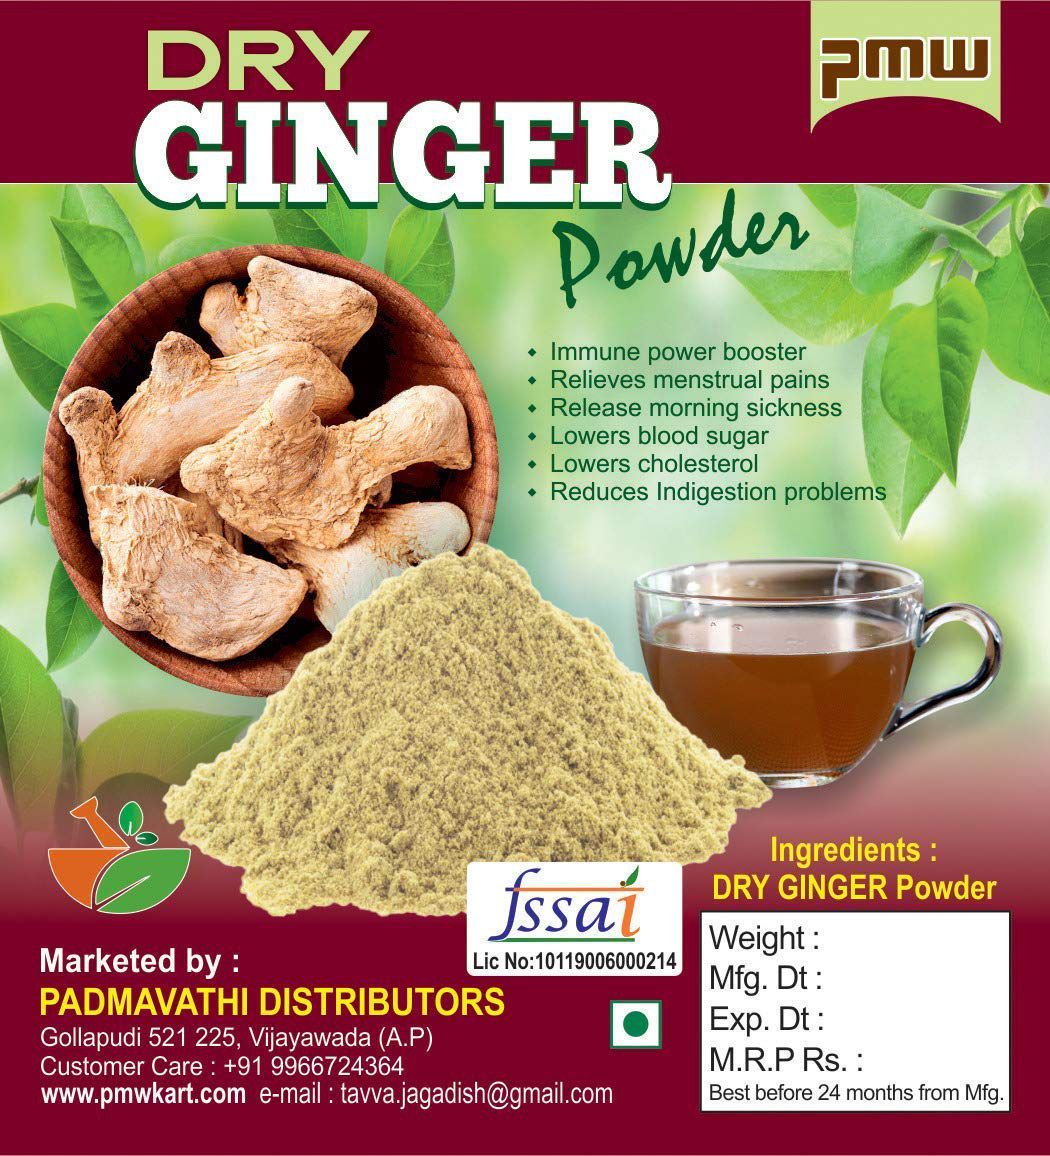     			Grade A Quality Dry Ginger Powder - 200 Grams - Sunth - Sonti - Sonth